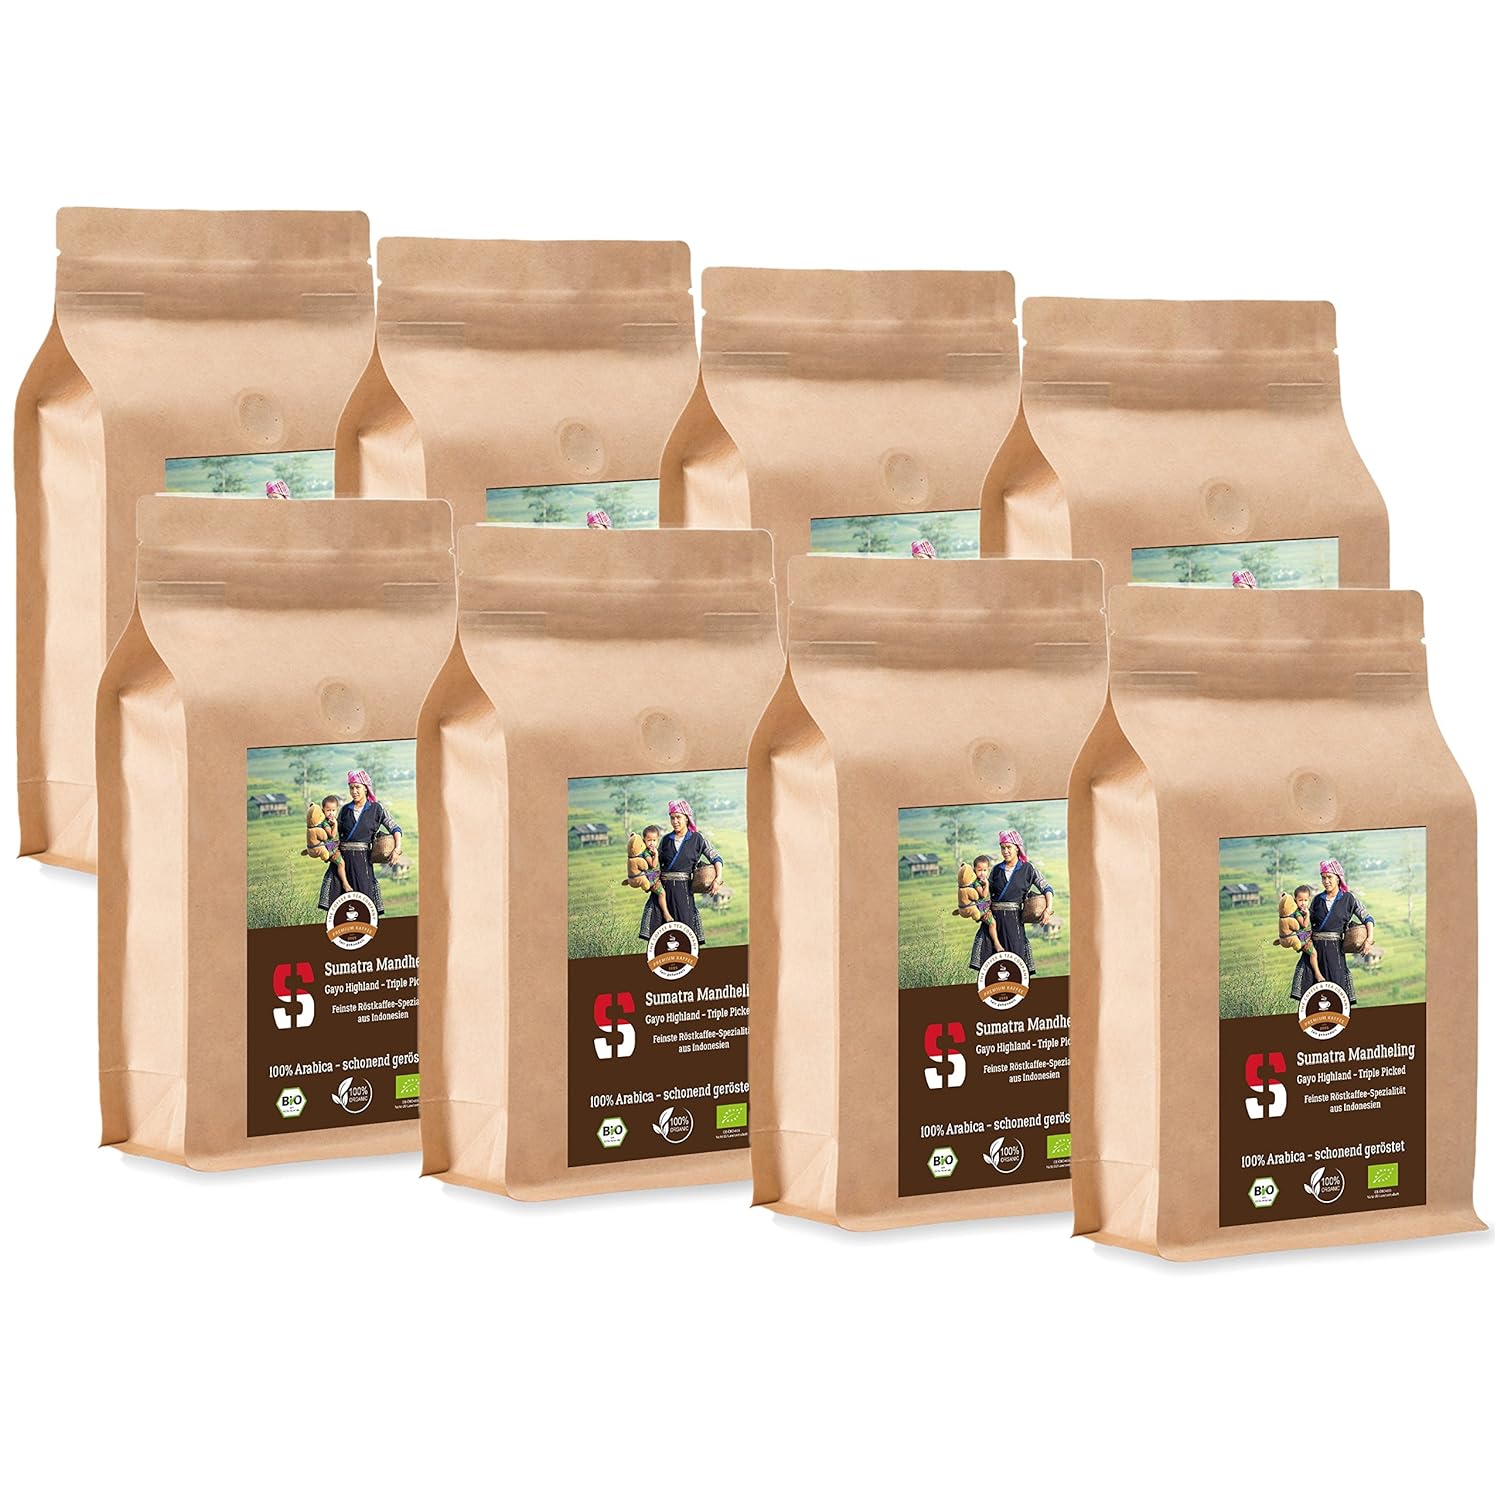 Coffee Globetrotter - Sumatra Mandheling Gayo Highland - Organic - 8 x 1000 g Coarse Painting - for Fully Automatic Coffee Grinder - Roasted Coffee from Organic Cultivation | Gastropack Economy Pack